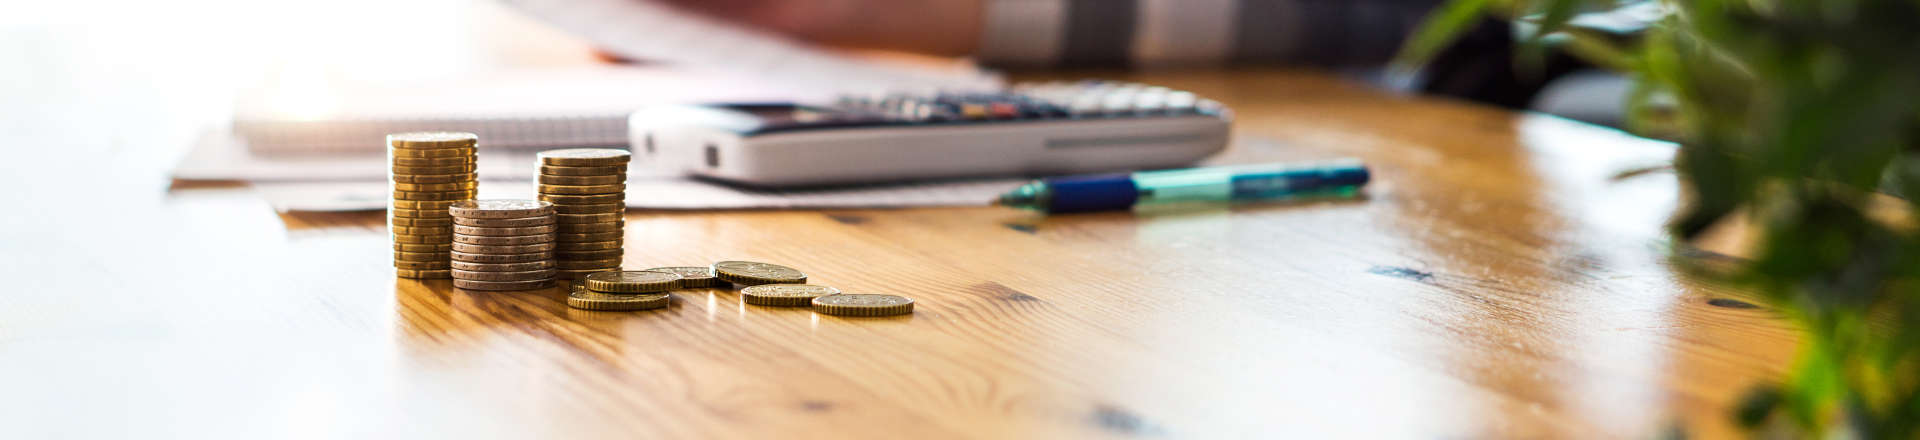 coins and a phone on a desk